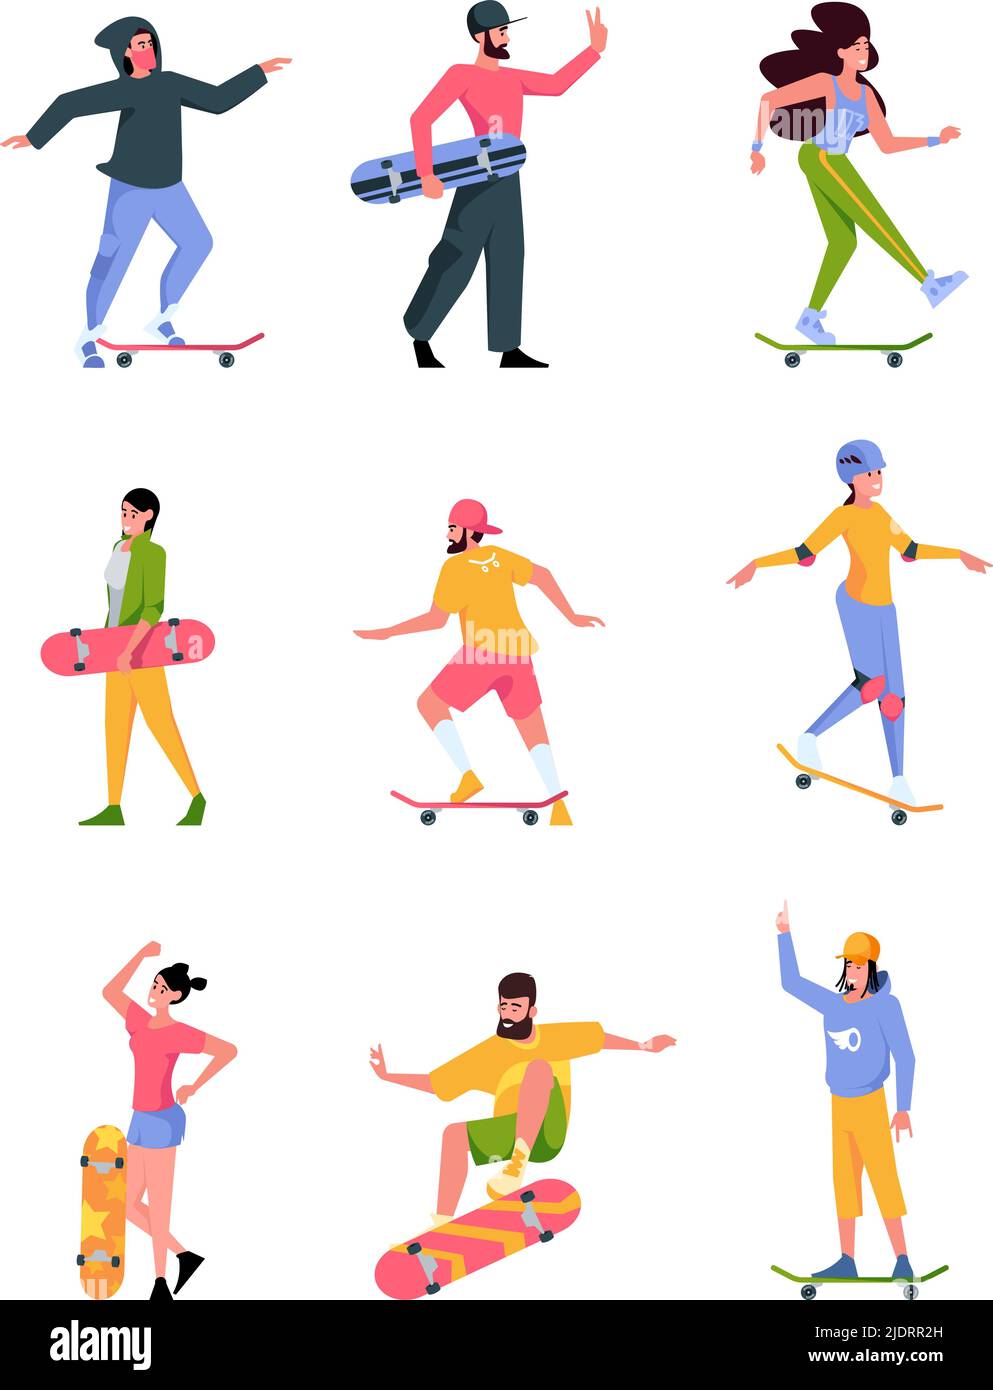 Skateboarders. Active riders teenagers jumping in action poses garish vector sport active people in casual closes Stock Vector